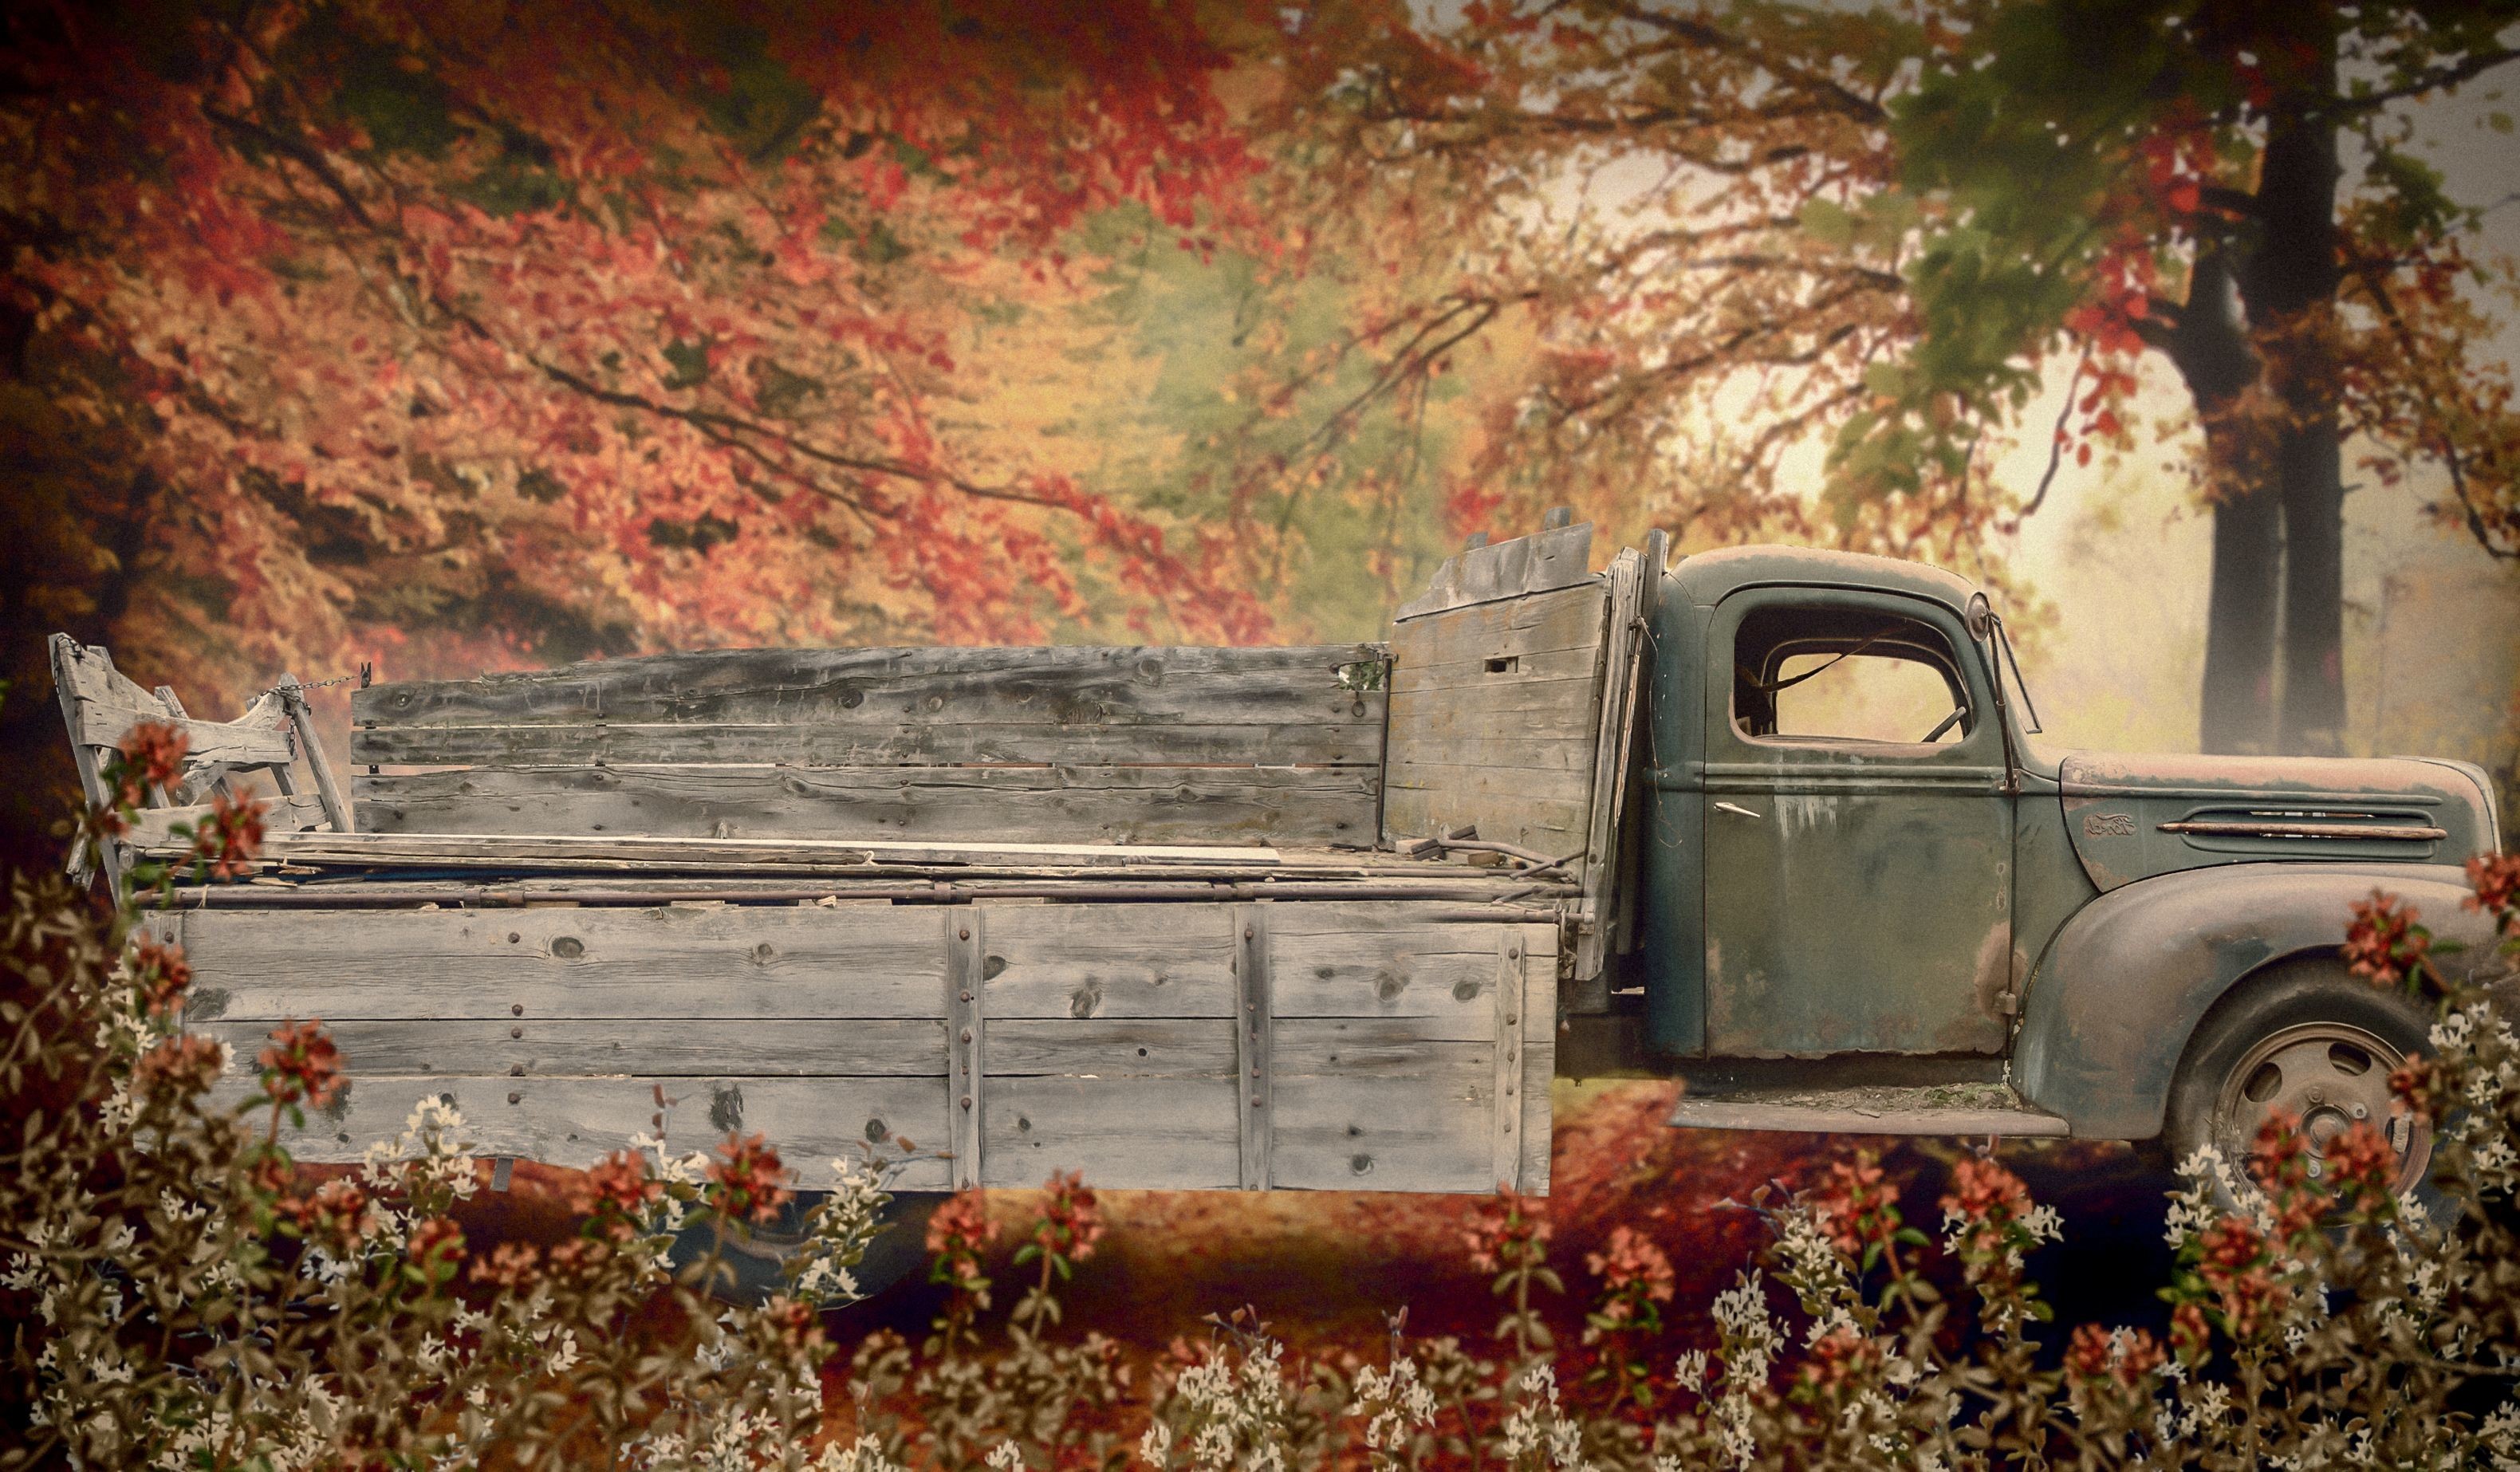 3160x1846 Old Truck Fall Family Photo Background- digital background, fall family  photo ideas, rustic old truck, pet digital backdrop download, digital wall  art, ...